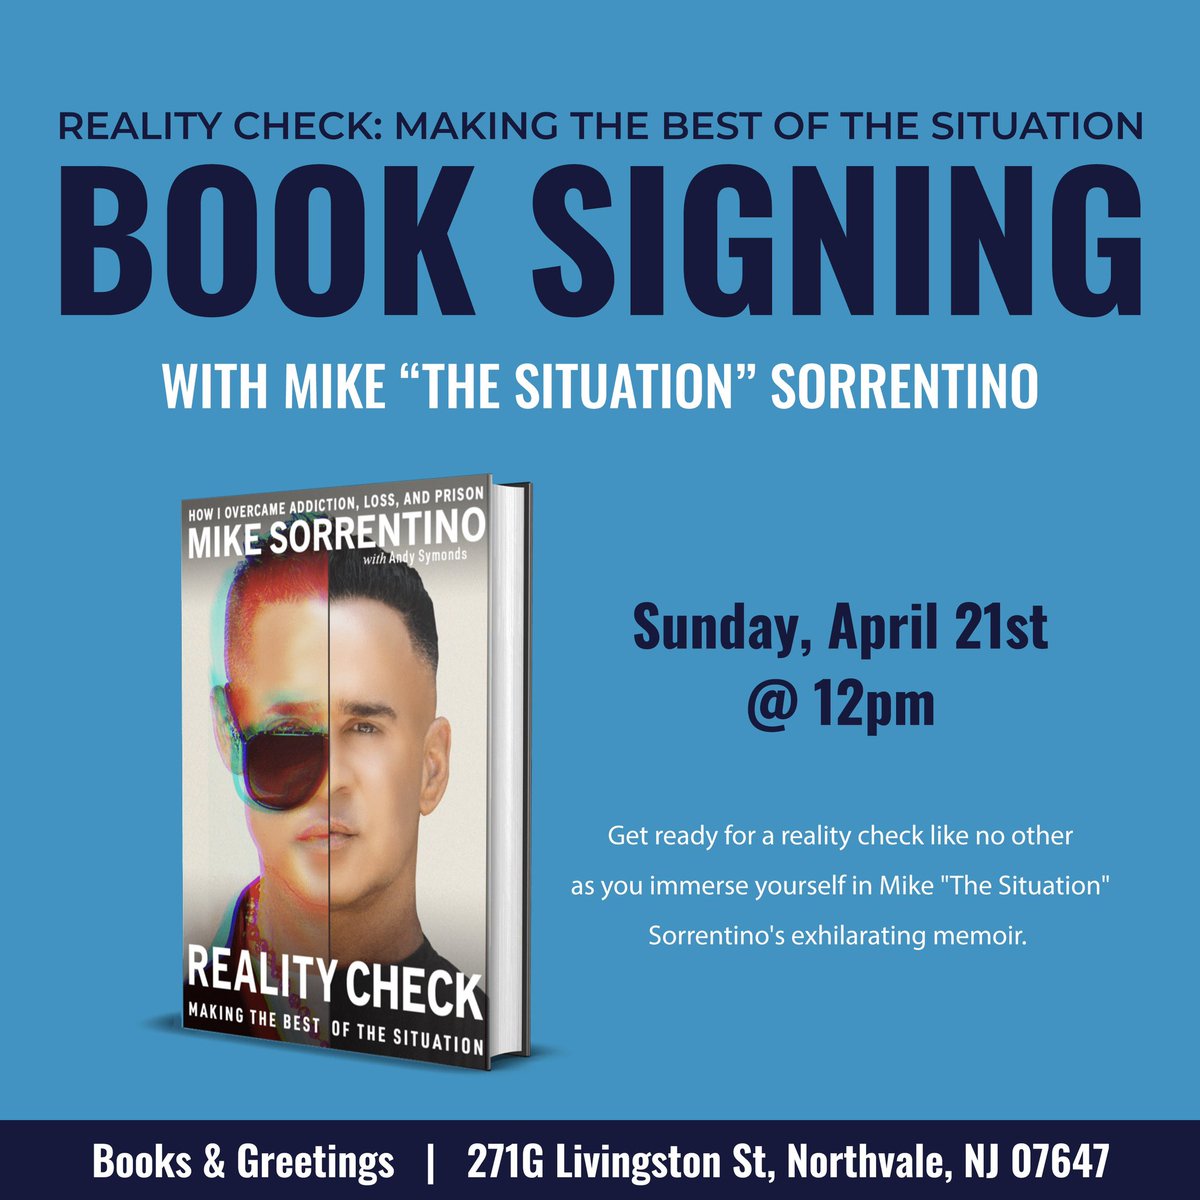 Additional tickets added by popular demand 🚨 Northvale, NJ 
Its happening 📚😎

Join me this Sunday @12pm at @booksngreetings for a Reality Check:Making the Best of the Situation Book Signing 😎

Tickets included with book purchase🎟️: 

eventbrite.com/e/meet-the-jer…

See you there 🔥